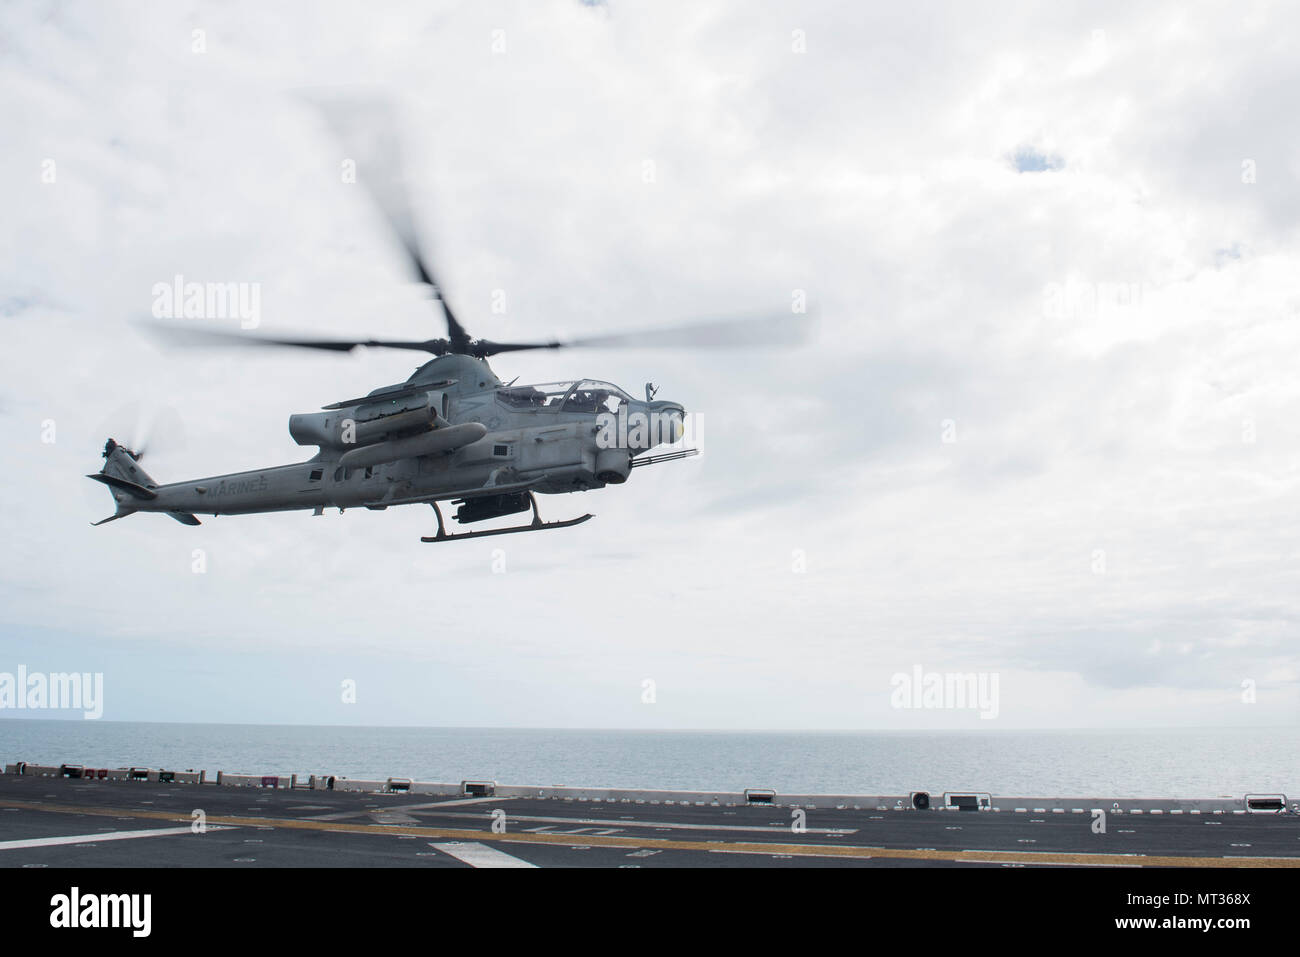 170723-N-NB544-305 CORAL SEA (July 23, 2017) An AH-1Z Viper, assigned to the 'Dragons' of Marine Medium Tiltrotor Squadron (VMM) 265 (Reinforced), 31st Marine Expeditionary Unit (MEU), takes off from the flight deck of the amphibious assault ship USS Bonhomme Richard (LHD 6) during Talisman Saber 17. Talisman Saber is a biennial U.S.-Australian bilateral exercise held off the coast of Australia meant to achieve interoperability and strengthen the U.S.-Australian alliance. (U.S. Navy photo by Mass Communication Specialist 2nd Class Kyle Carlstrom/Released) Stock Photo